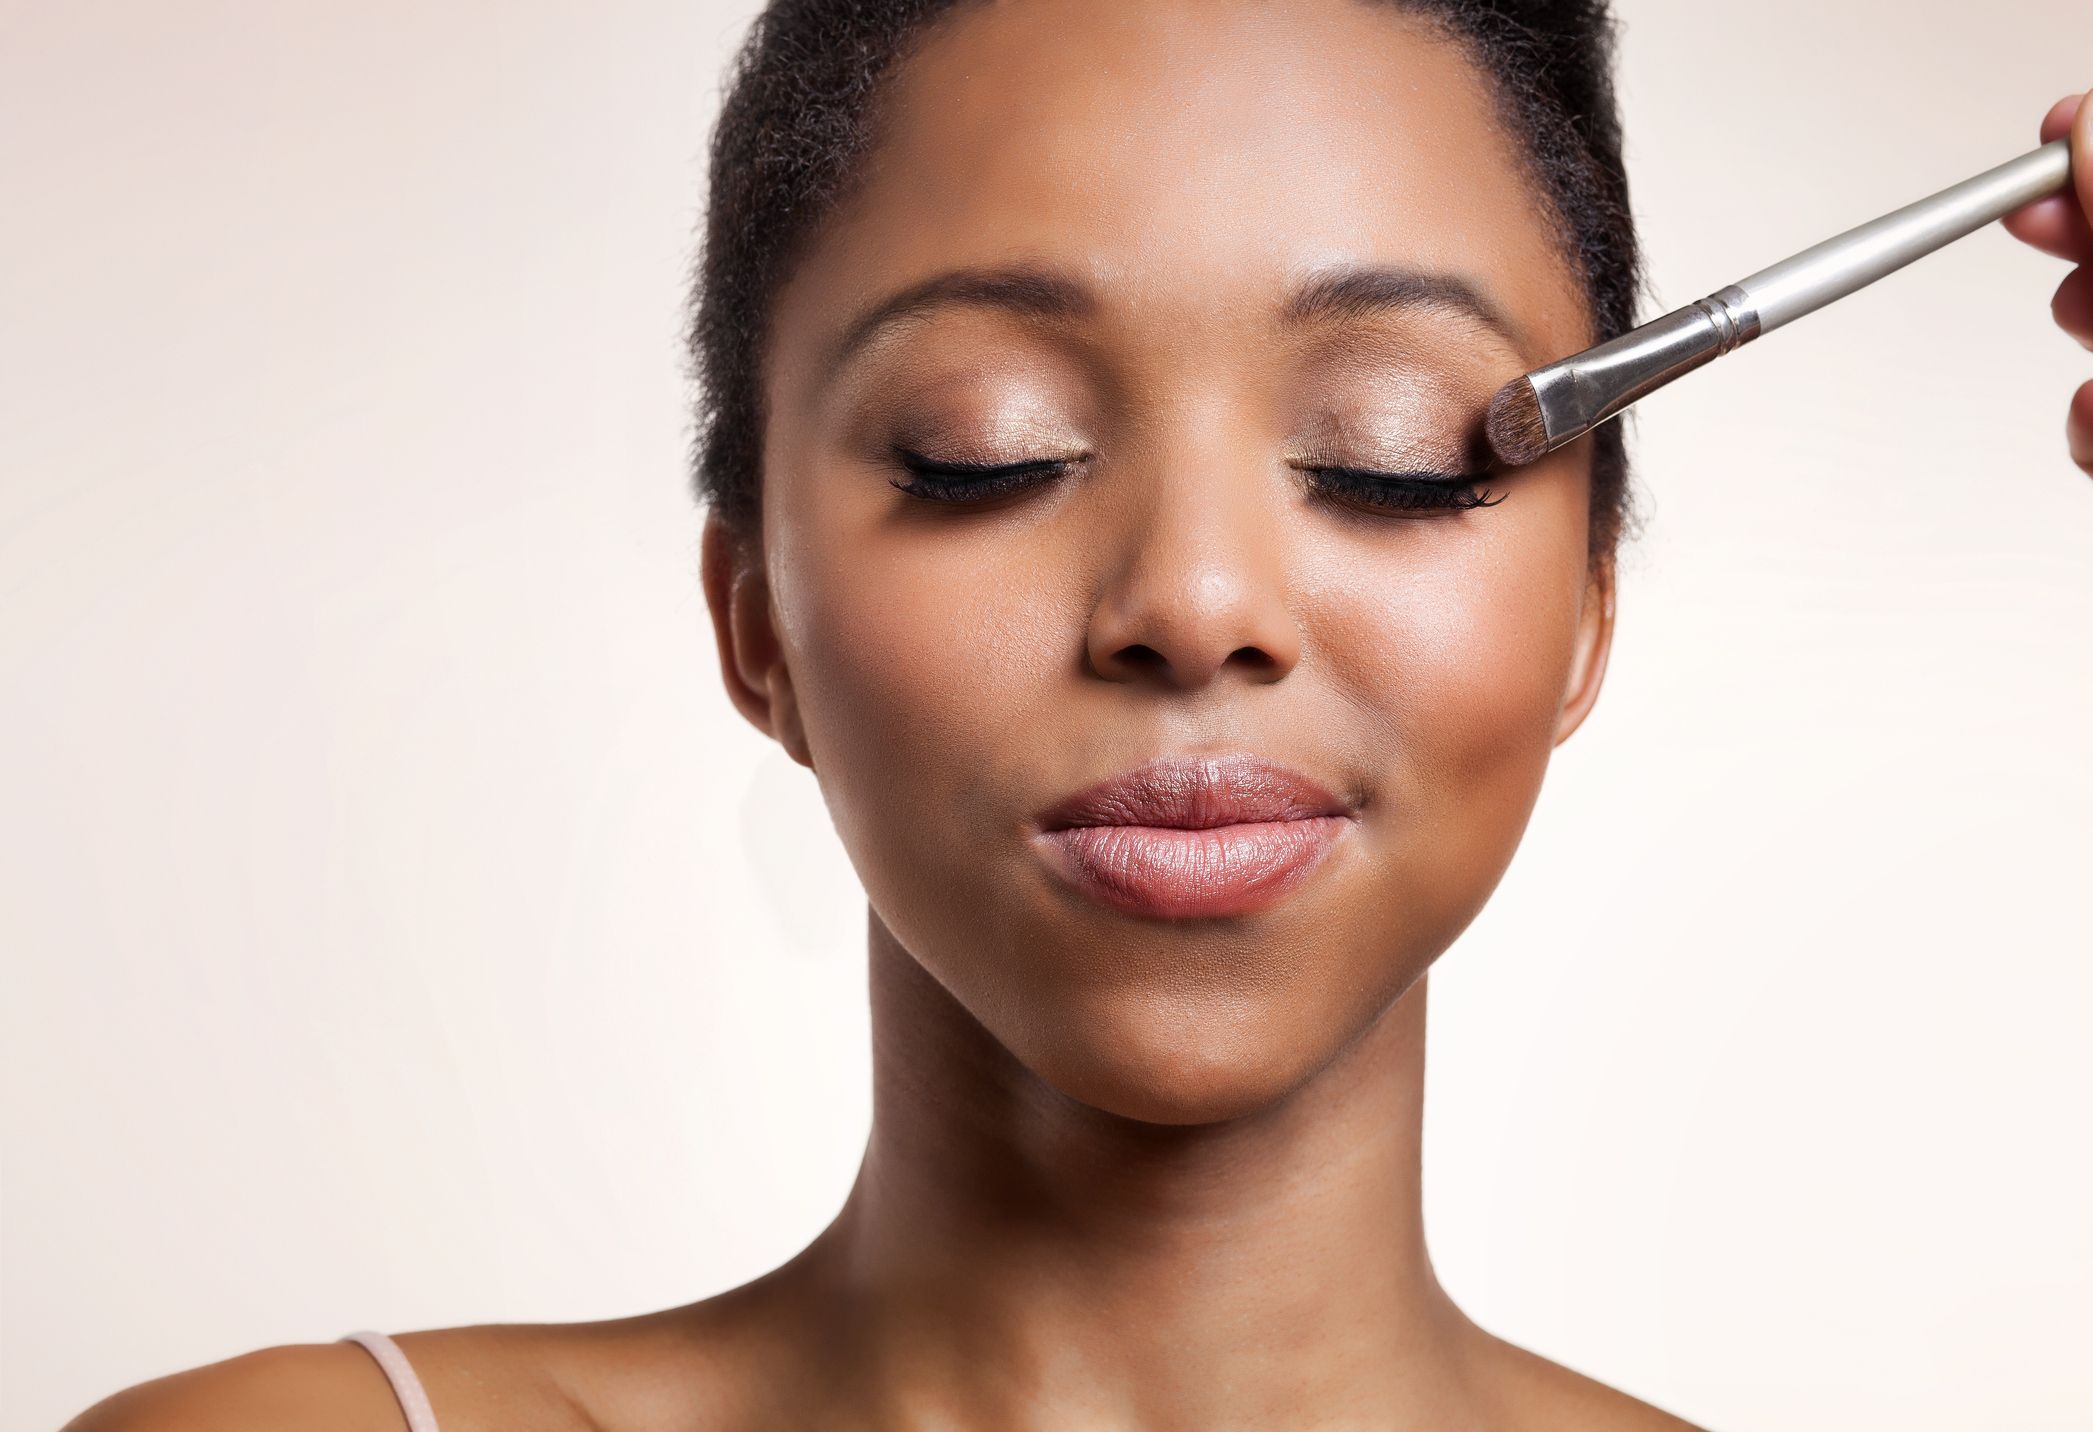 Makeup Mistakes That Make You Look